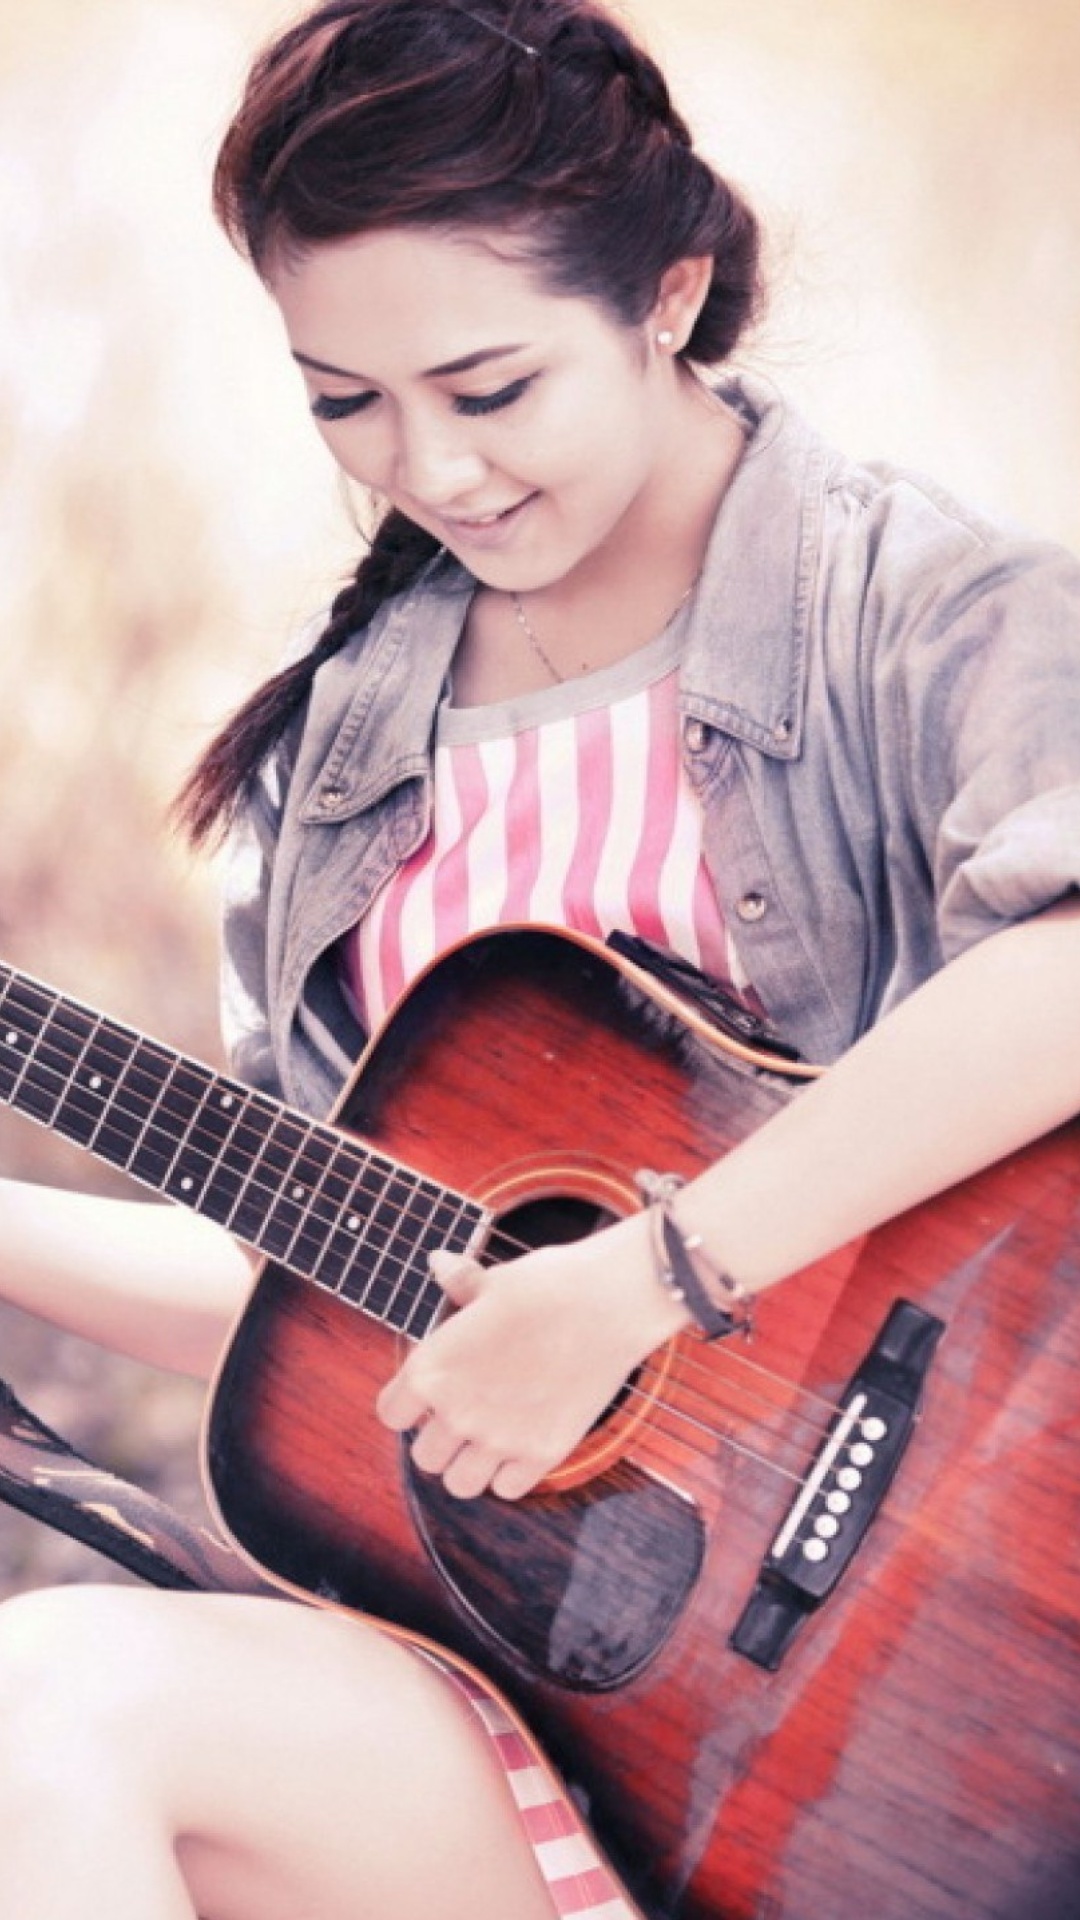 Chinese girl with guitar wallpaper 1080x1920